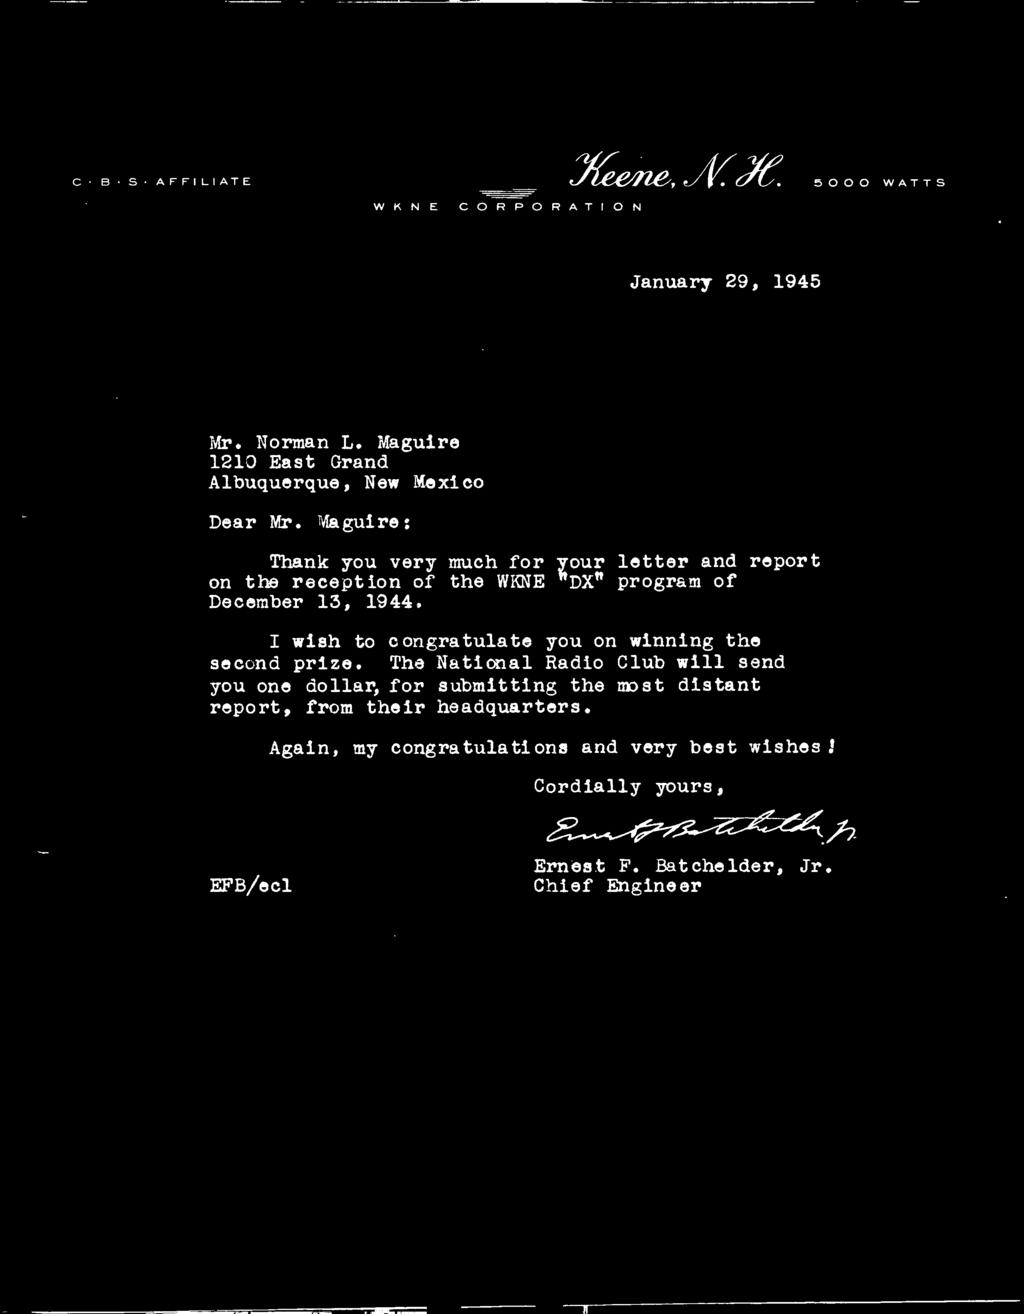 Maguire: Thank you very much for your letter and report on the reception of the WKNE "DX" program of December 13, 1944.